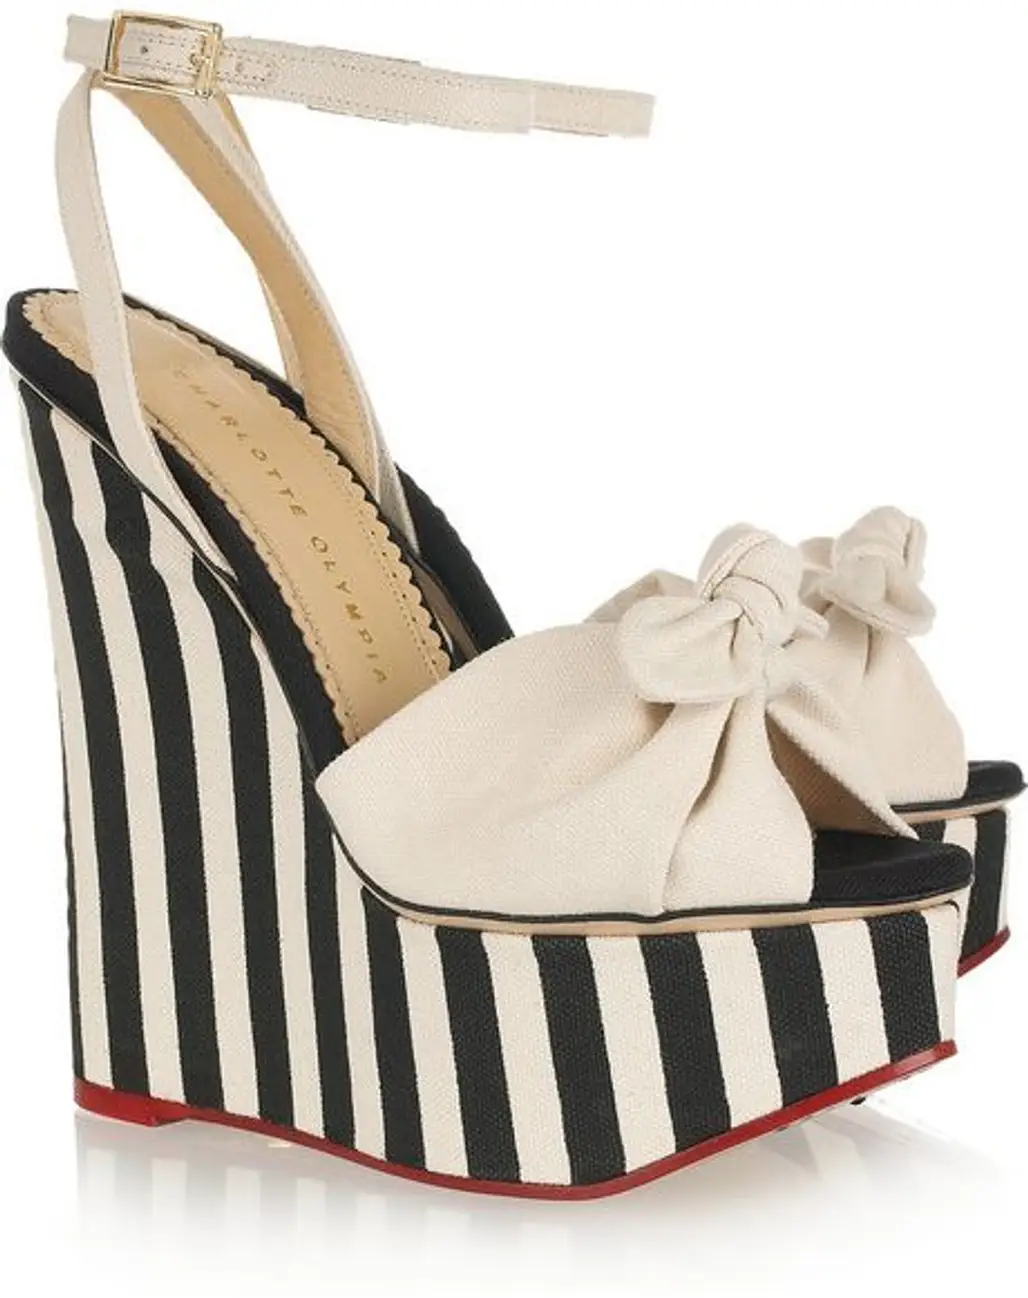 Charlotte Olympia Meredith Striped Canvas Wedge Sandals